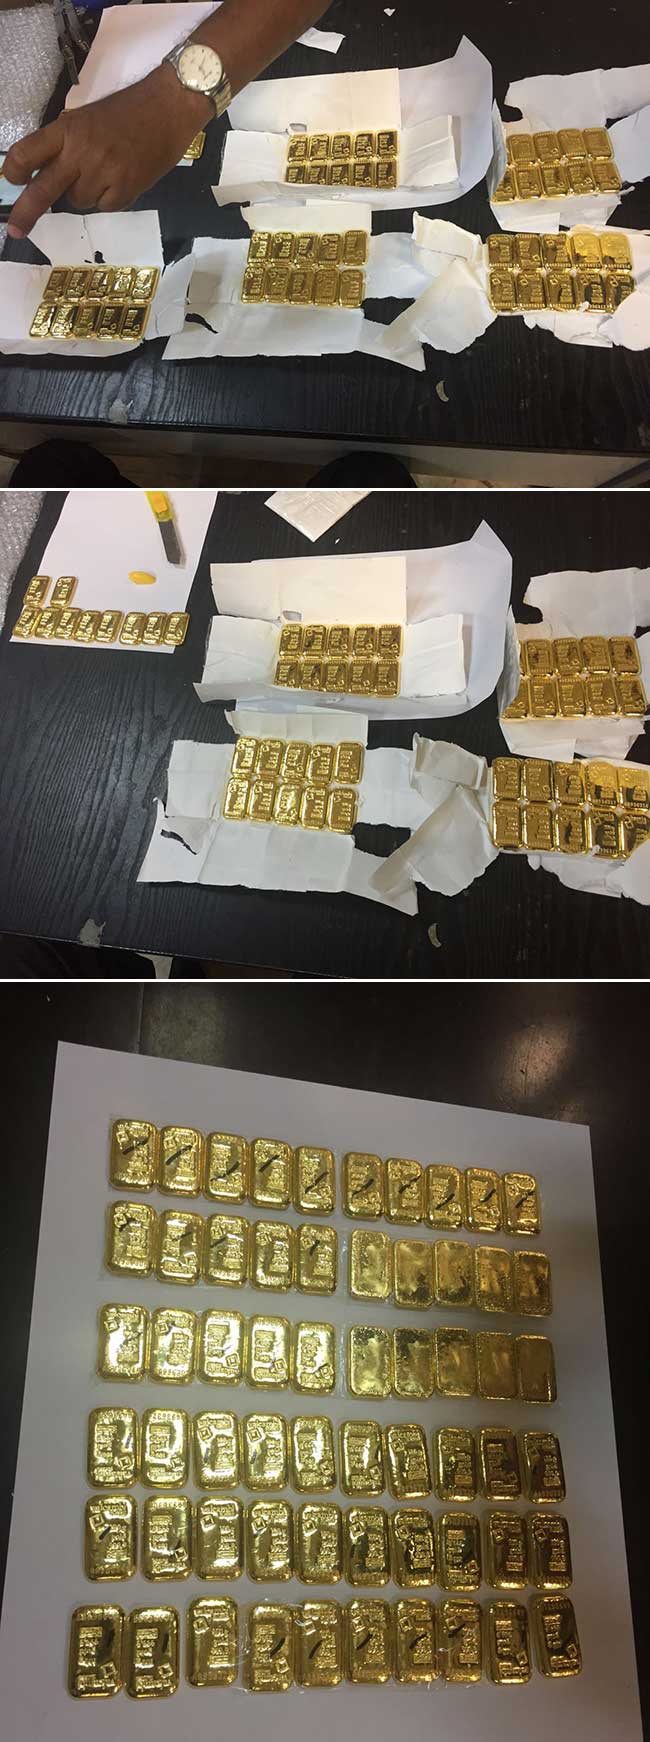 Senior immigration officer arrested with 60 gold biscuits in pockets